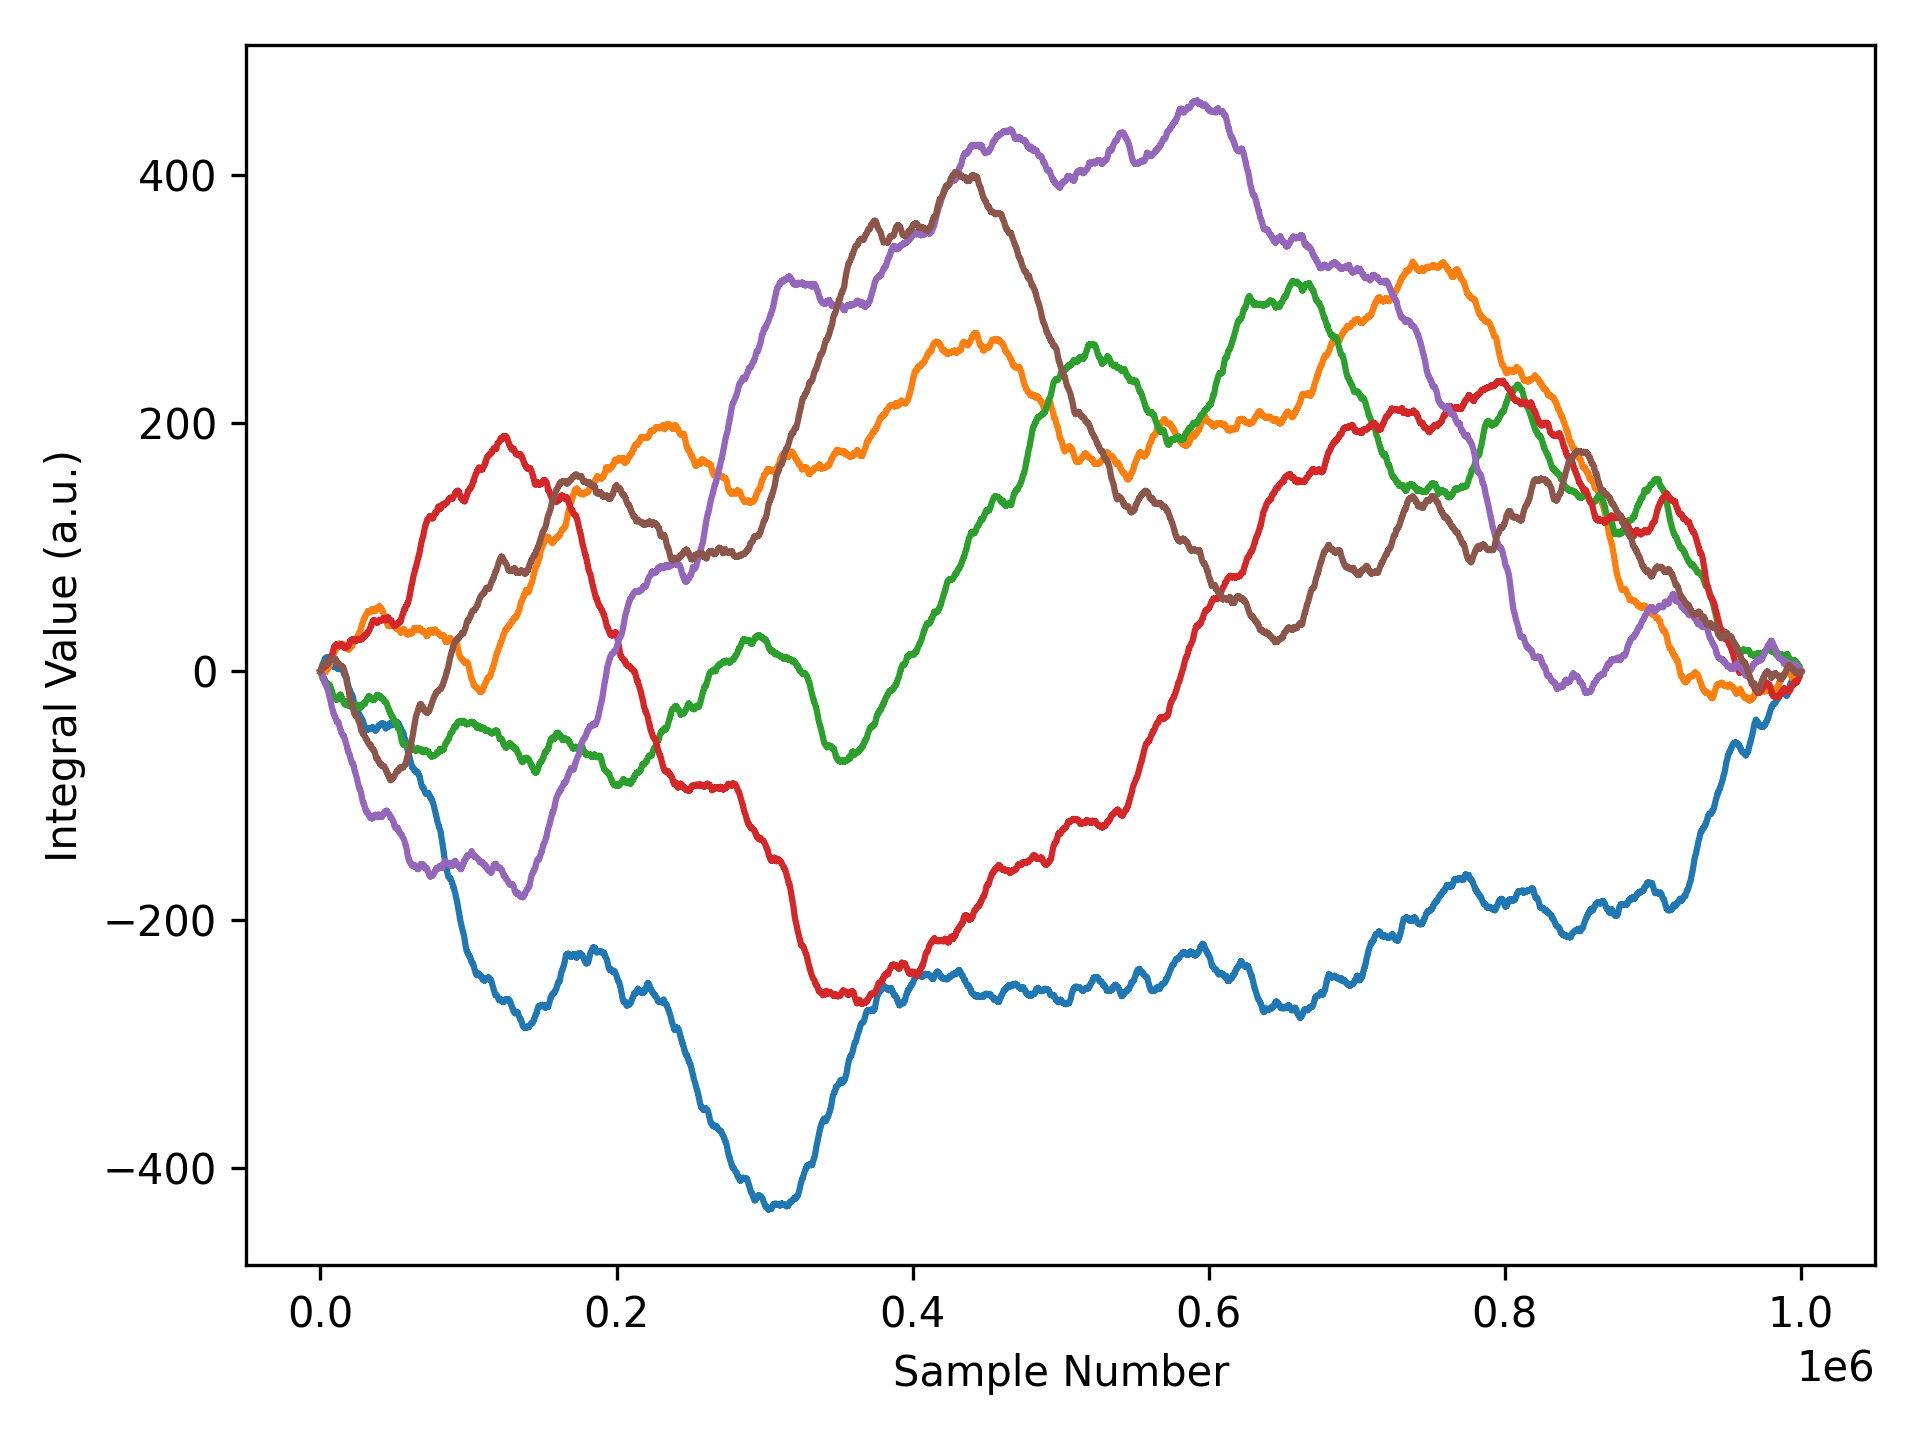 A plot of six random-walk-like signals that begin with a value of 0.0 and end with a value of 0.0, but are uncorrelated otherwise.